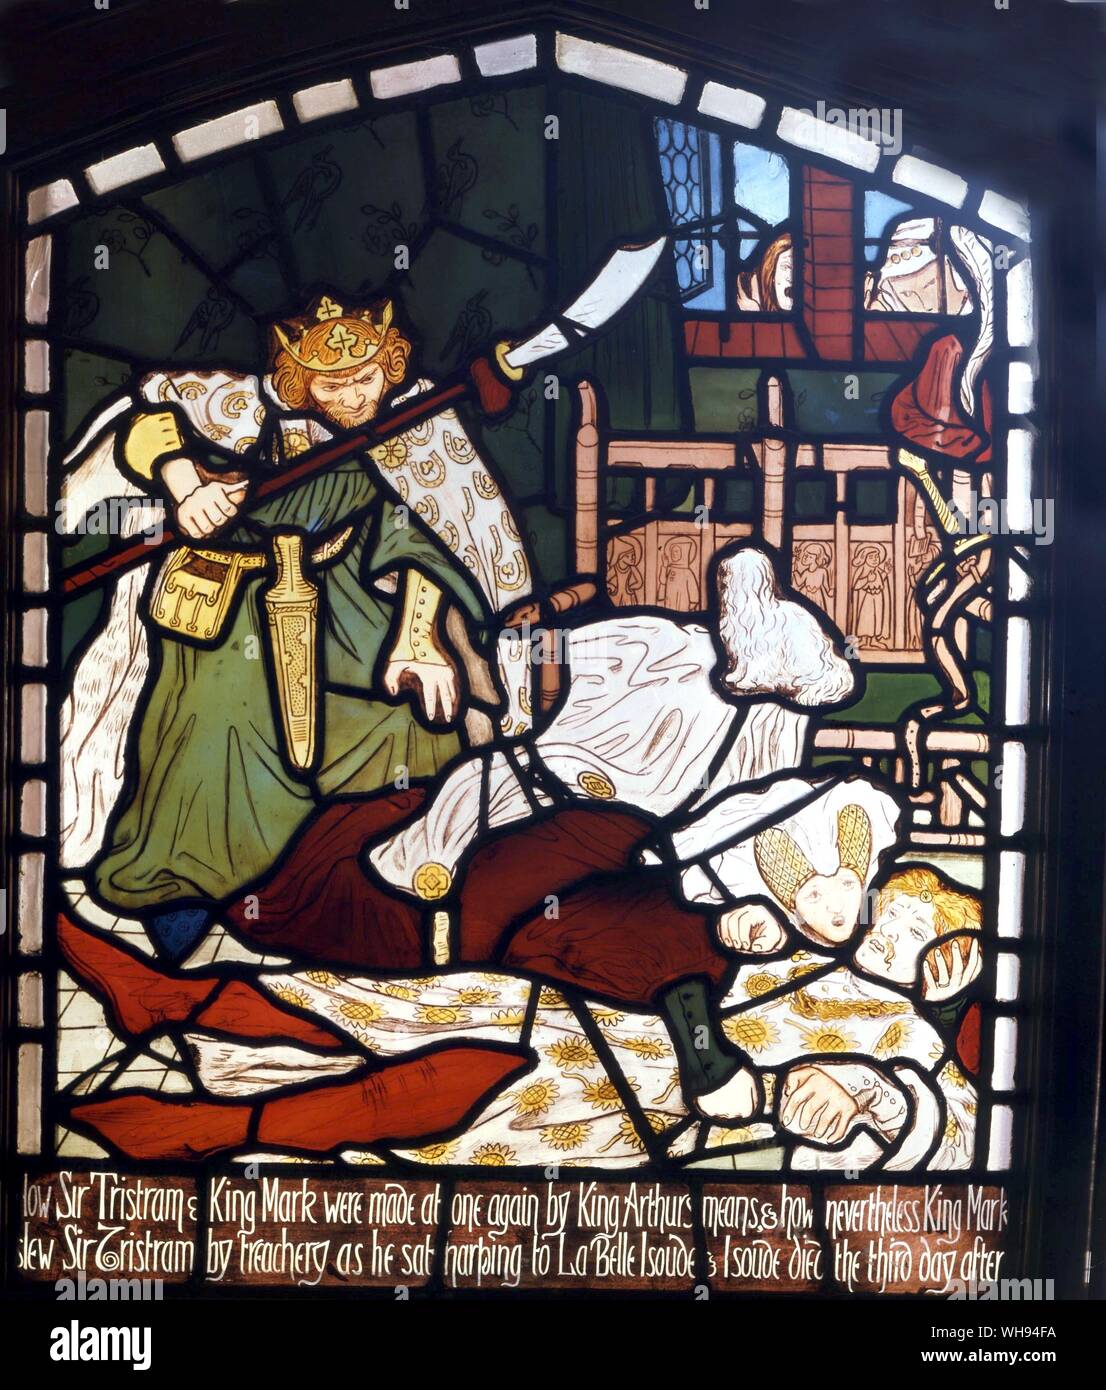 King Arthur. Death of Sir Tristram. Tristan & Isolde - 1862. Stained glass window from Harden Grange, nr. Bingley, Yorkshire.. William Morris (March 24, 1834 - October 3, 1896) was one of the principal founders of the British Arts and Crafts movement and is best known as a designer of wallpaper and patterned fabrics, a writer of poetry and fiction, and a pioneer of the socialist movement in Britain near London. . Location © Bradford Art Galleries and Museums, West Yorkshire, UK . Stock Photo